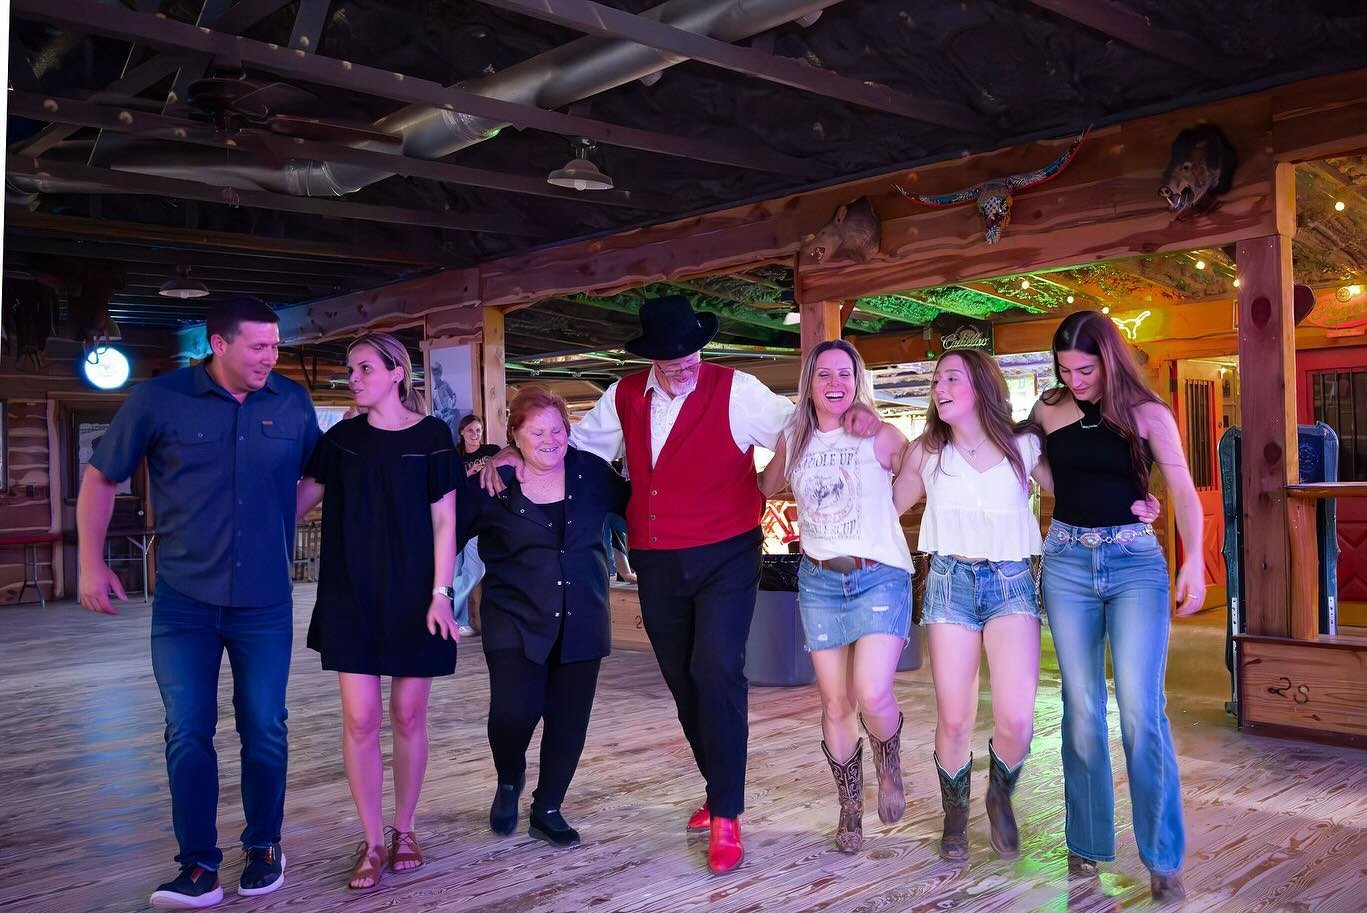 Special thanks to our May 4 group who visited the Cadillac from all over the world! We hope y&rsquo;all had as much fun as we did. 

Looking for a space to host your event or create a truly unique Texas experience? We can help! #cadillacmarblefalls 	